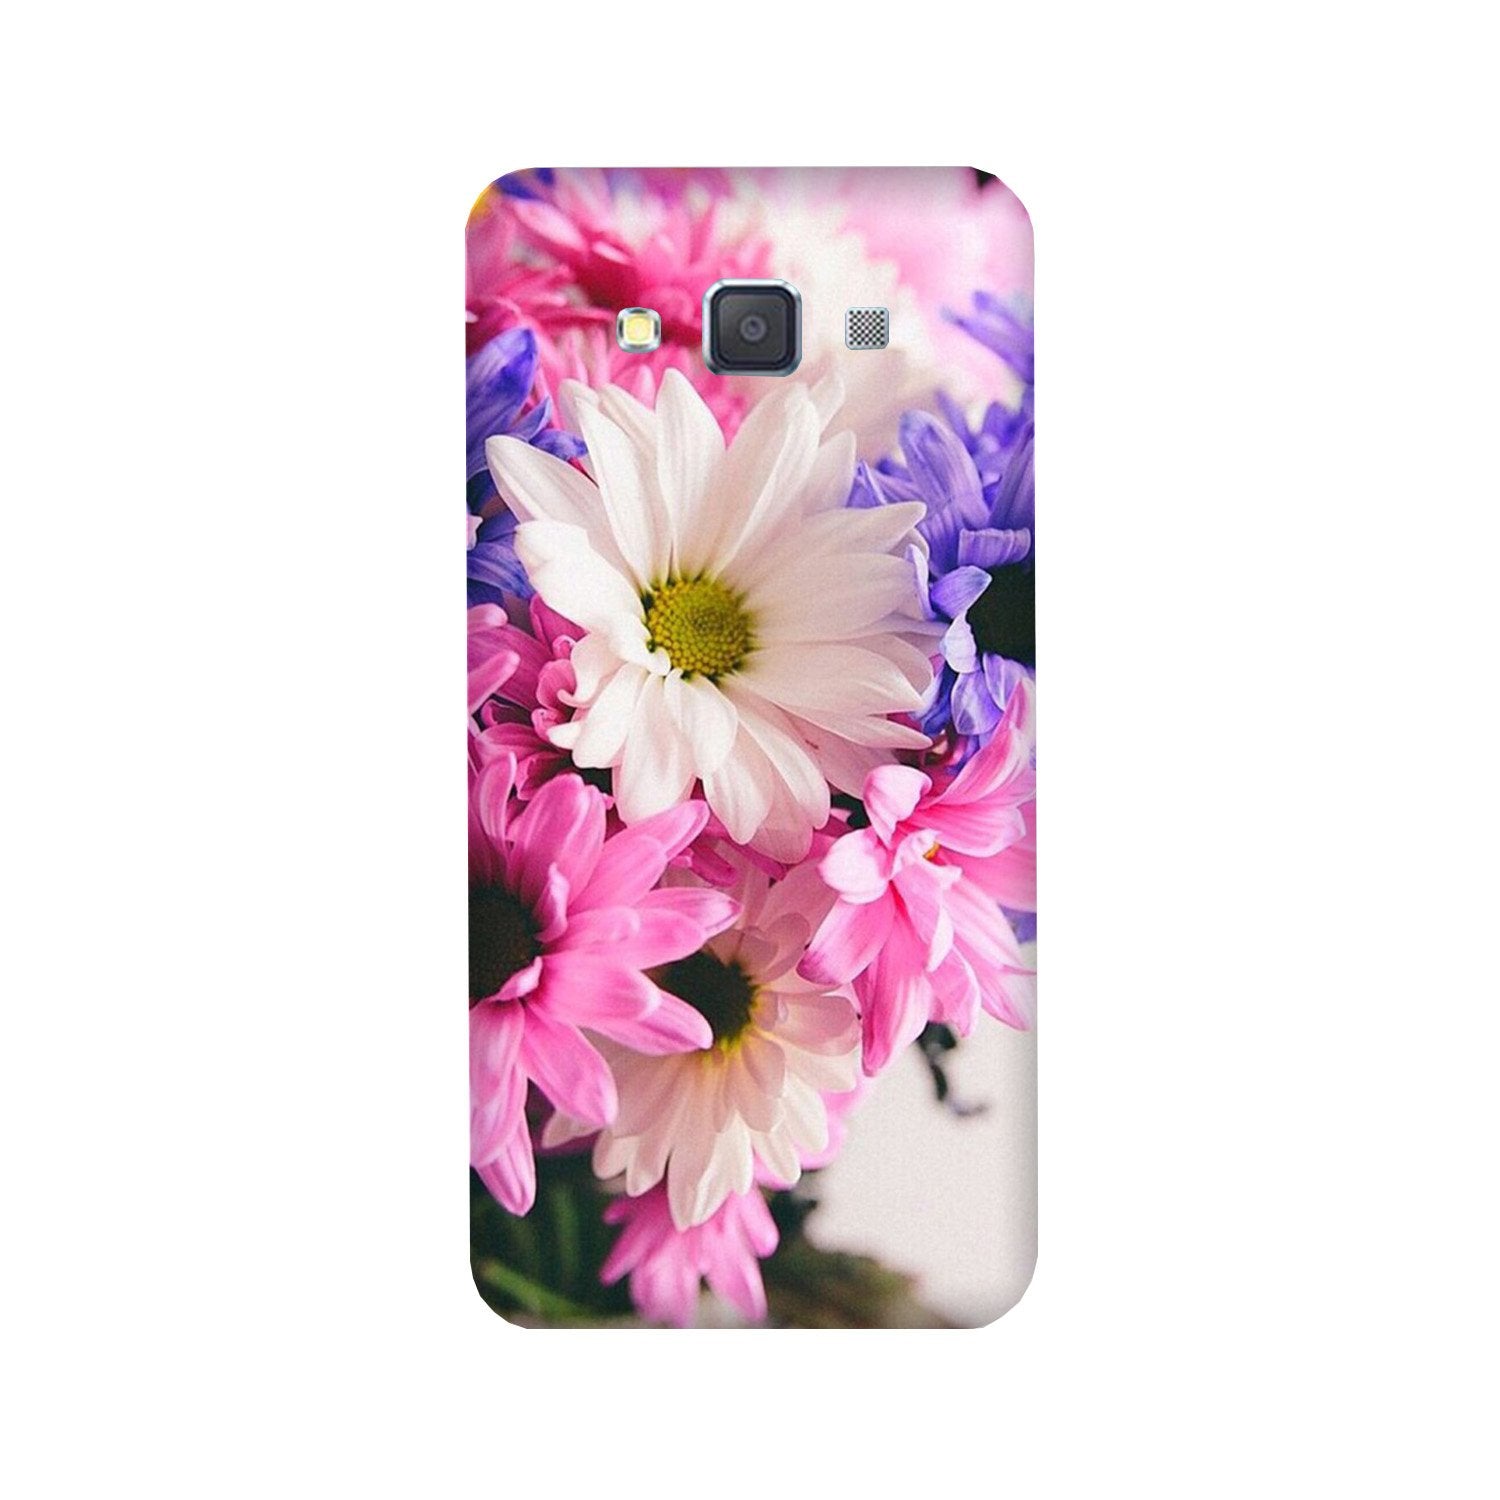 Coloful Daisy Case for Galaxy ON5/ON5 Pro